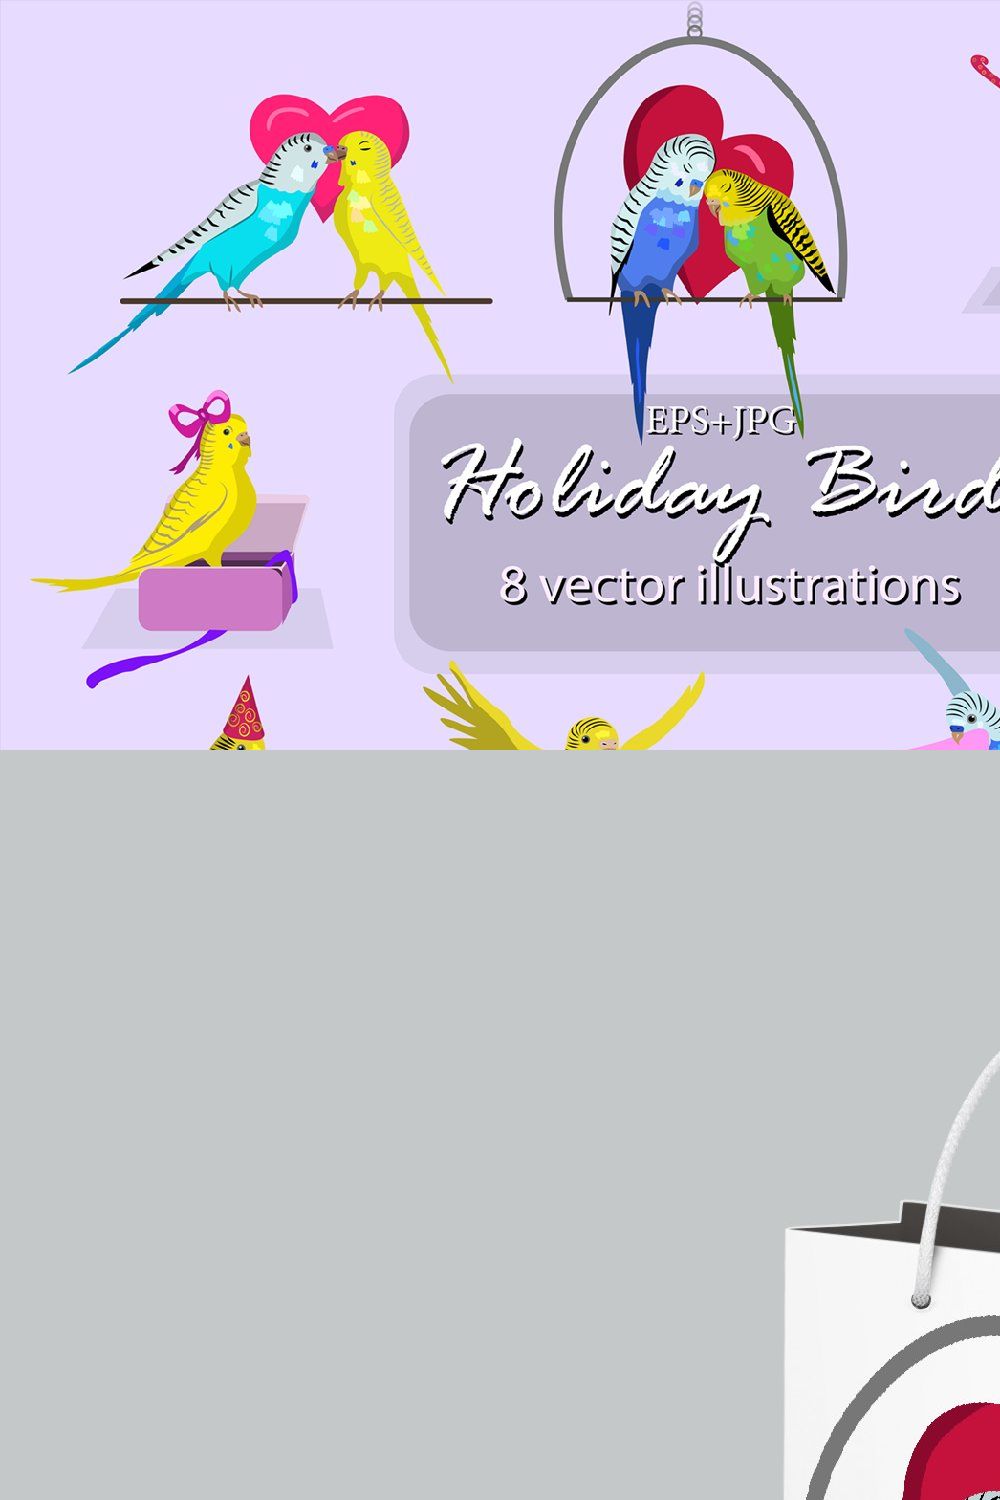 Holiday budgie birds vector set pinterest preview image.